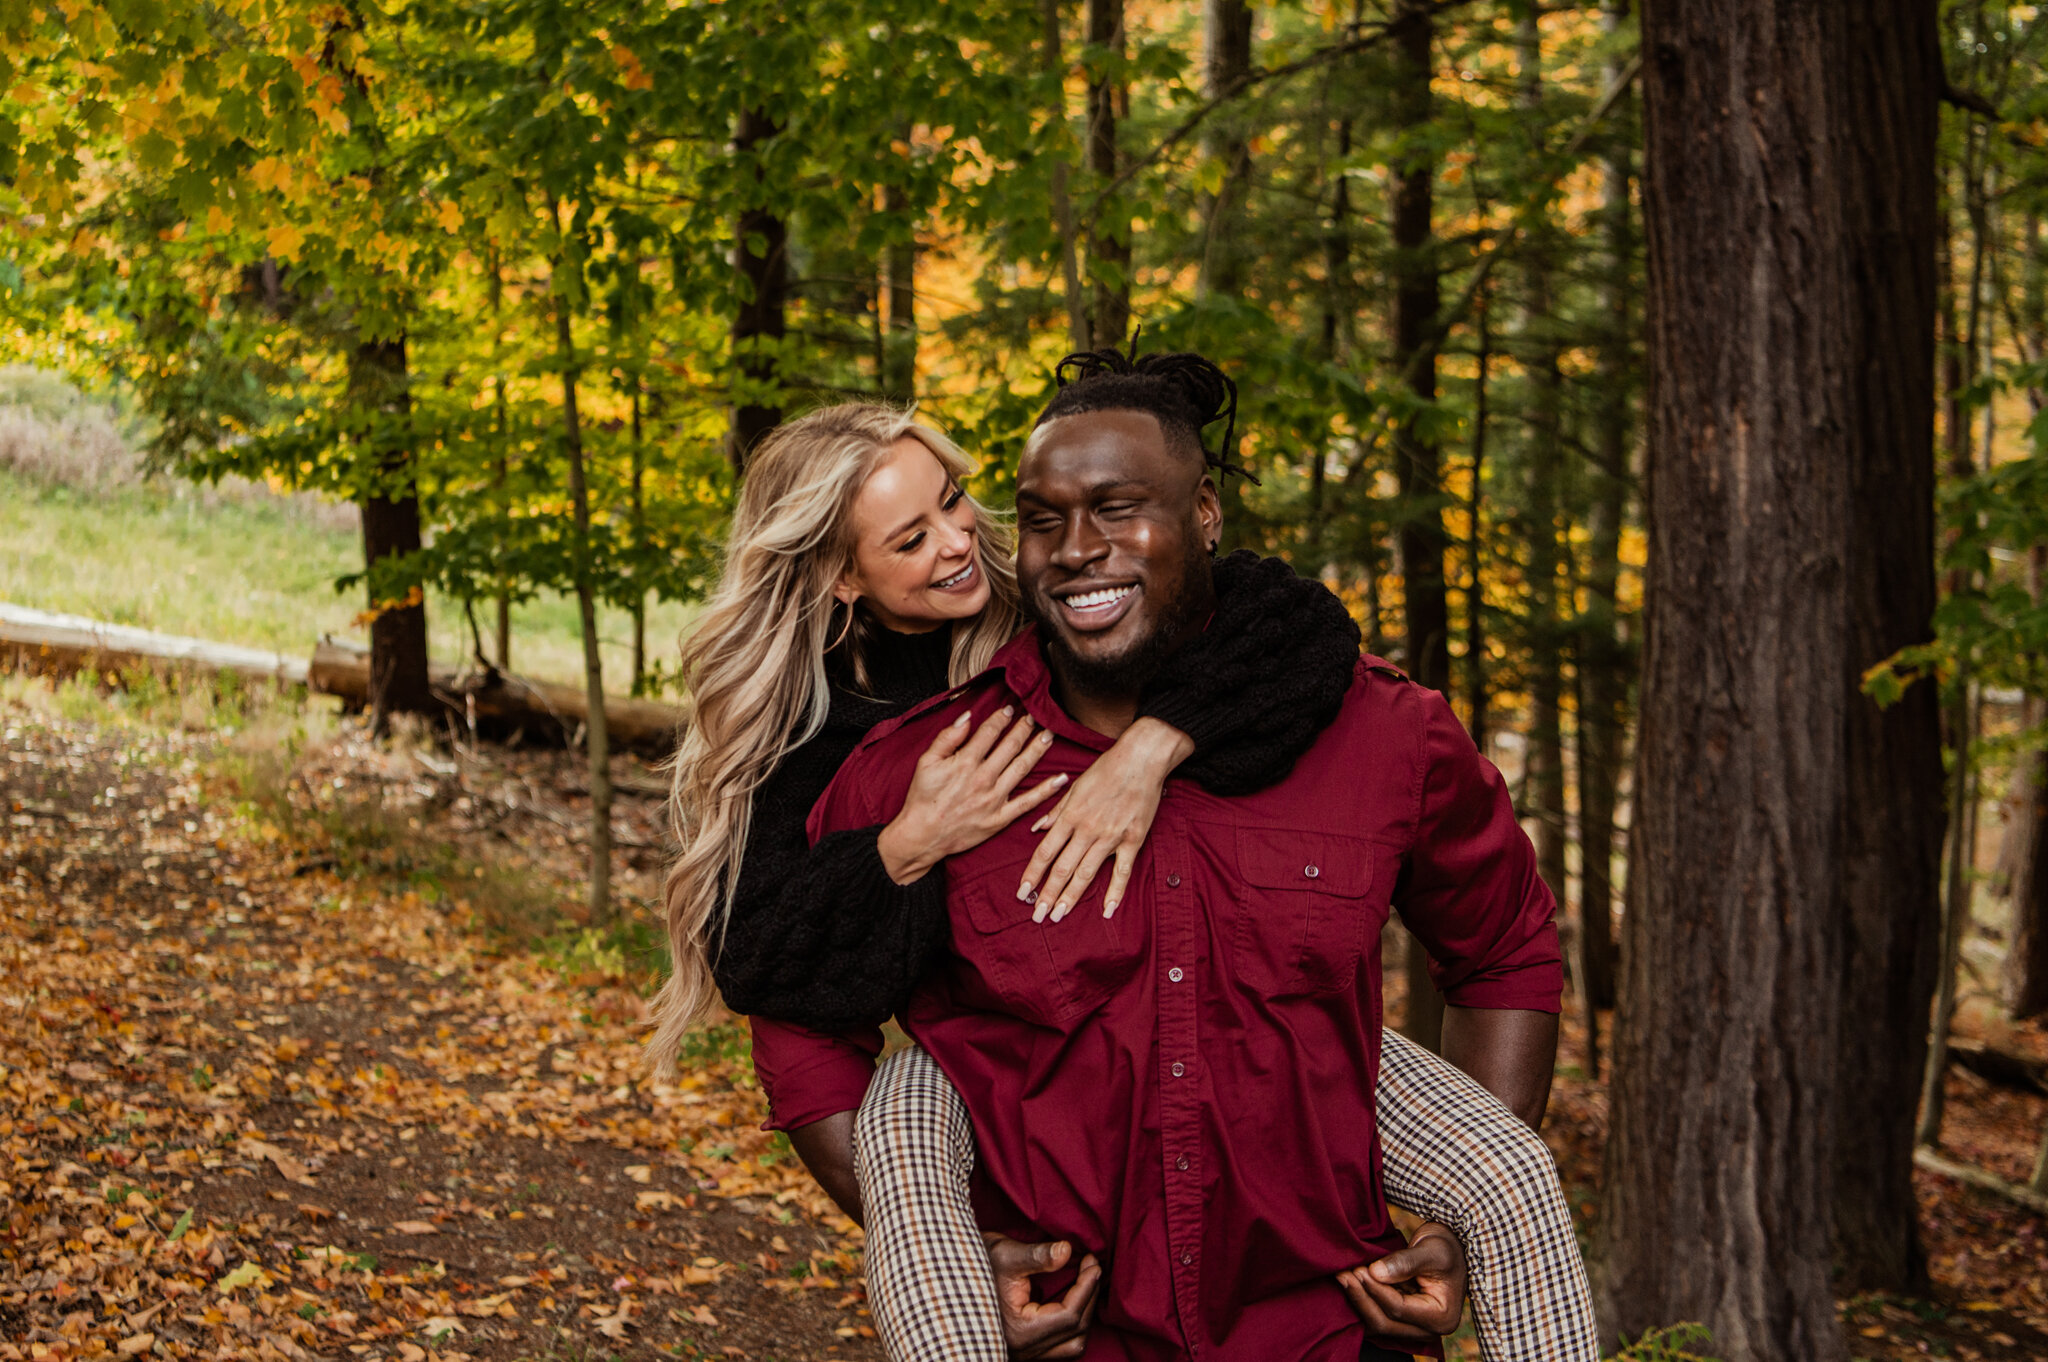 Letchworth_State_Park_Rochester_Couples_Session_JILL_STUDIO_Rochester_NY_Photographer_9374.jpg